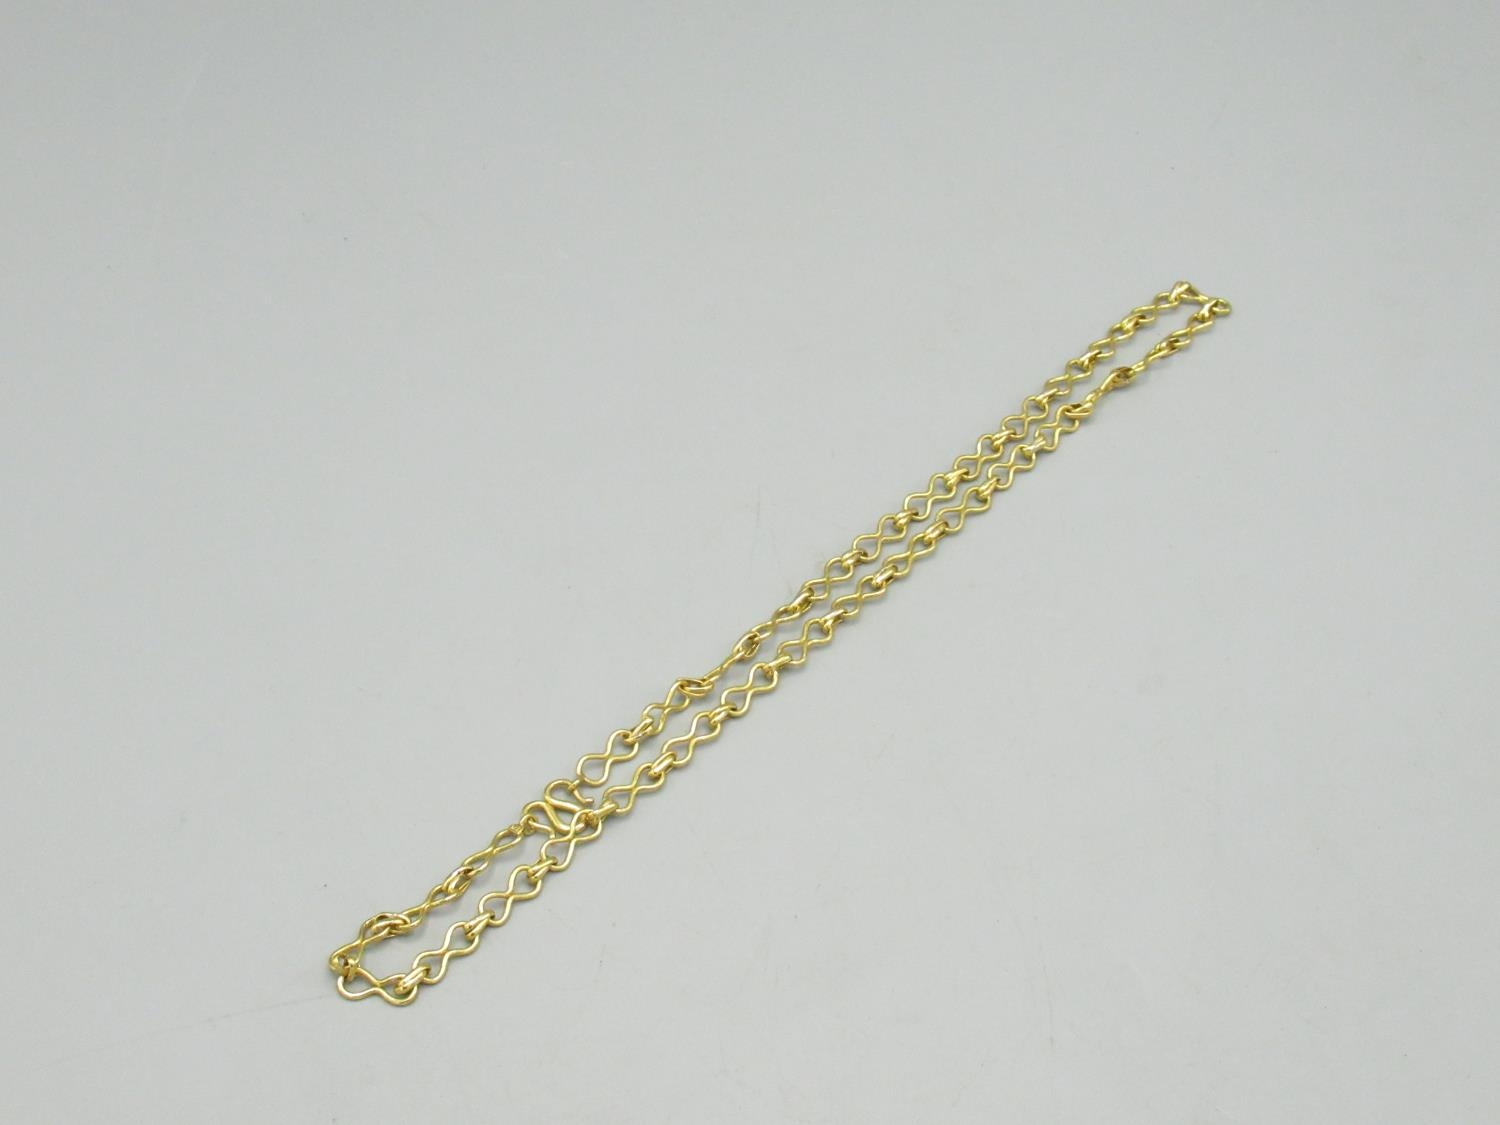 Yellow metal fancy link necklace, stamped 22c, L50cm, 27.0g